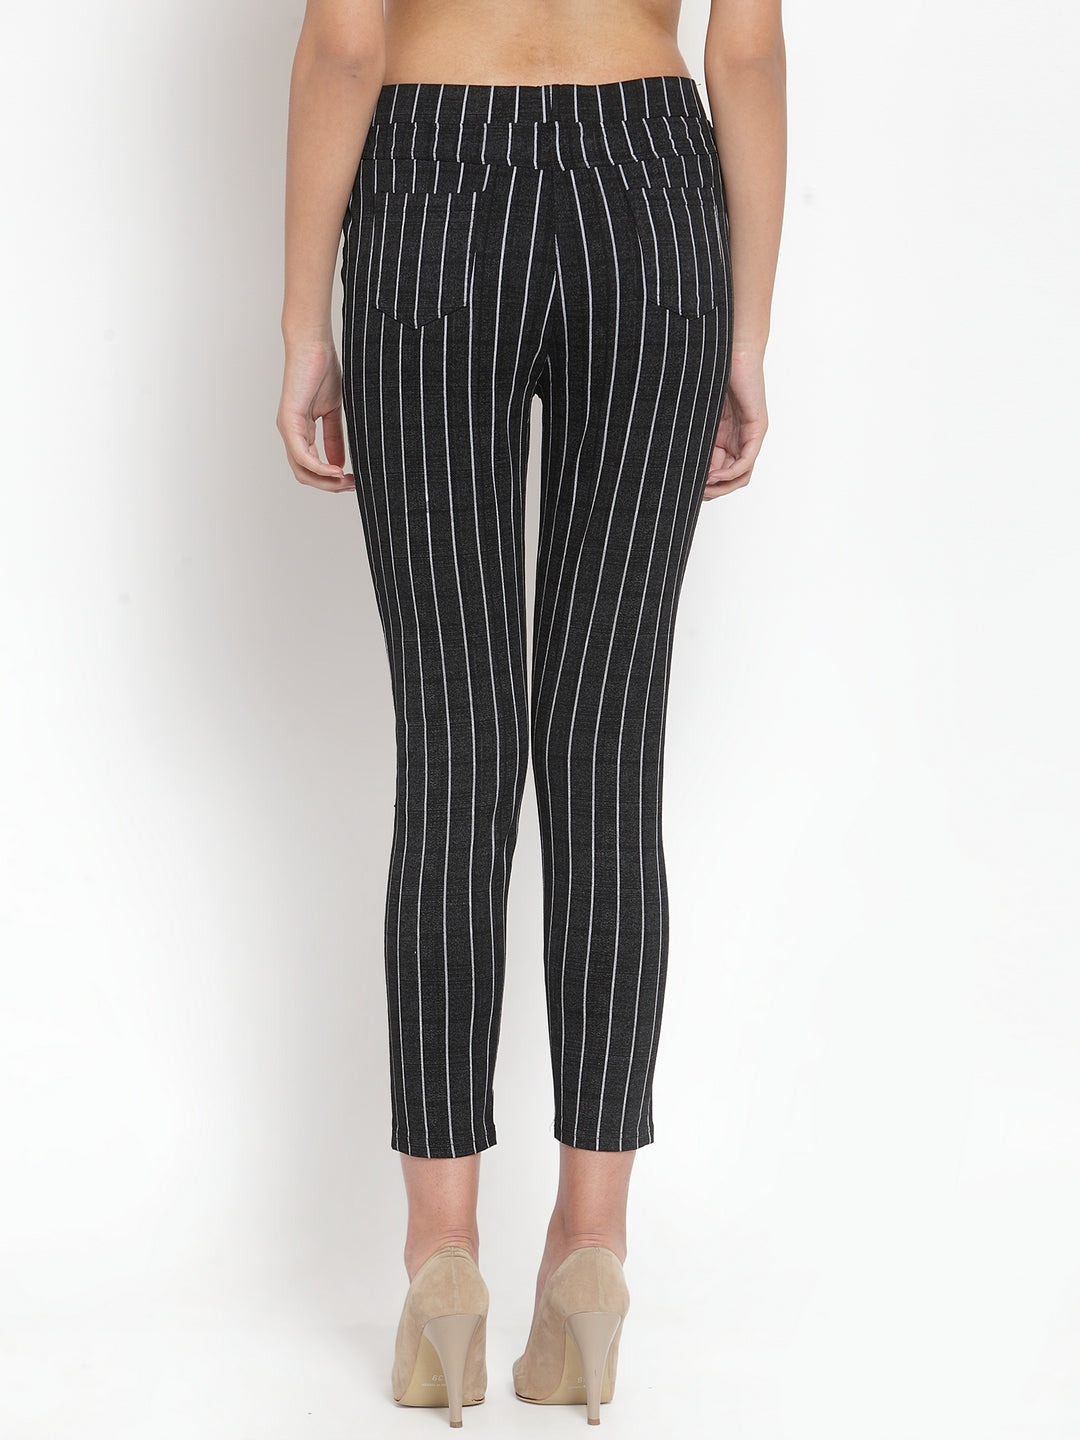 Women Black Striped Mid Rise Stretchable Jegging